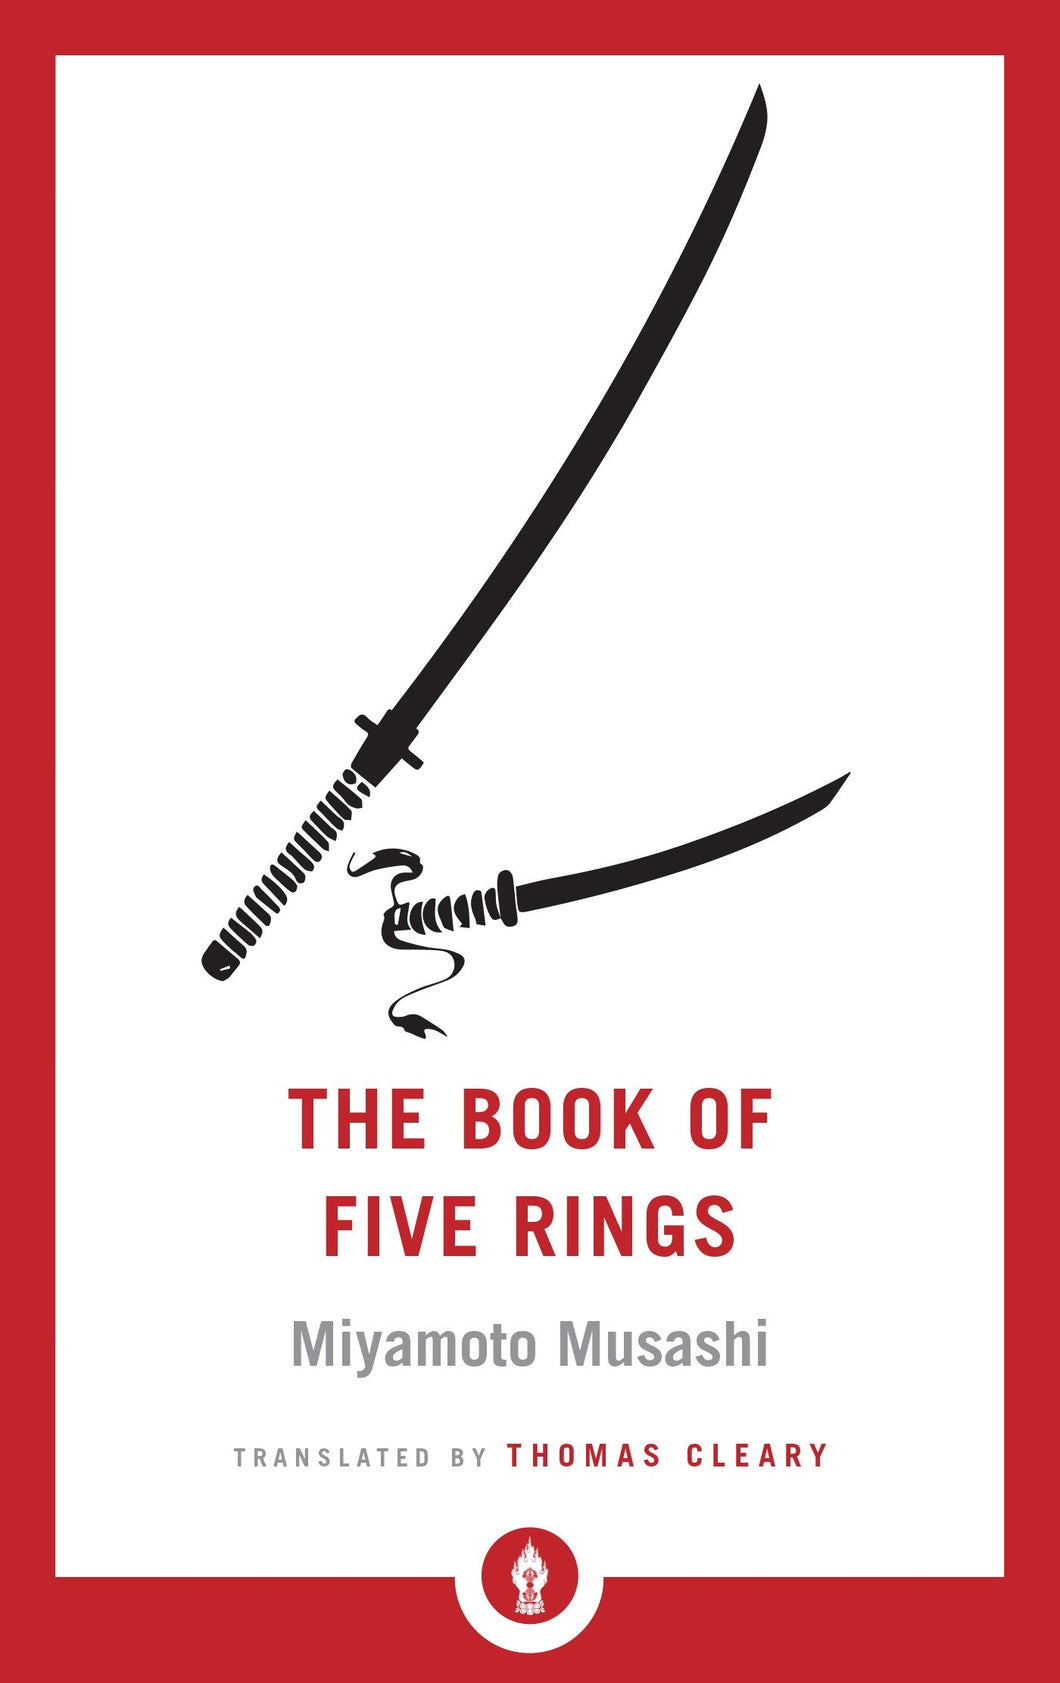 The Book of Five Rings [Miyamoto Musashi, translated by Thomas Cleary]